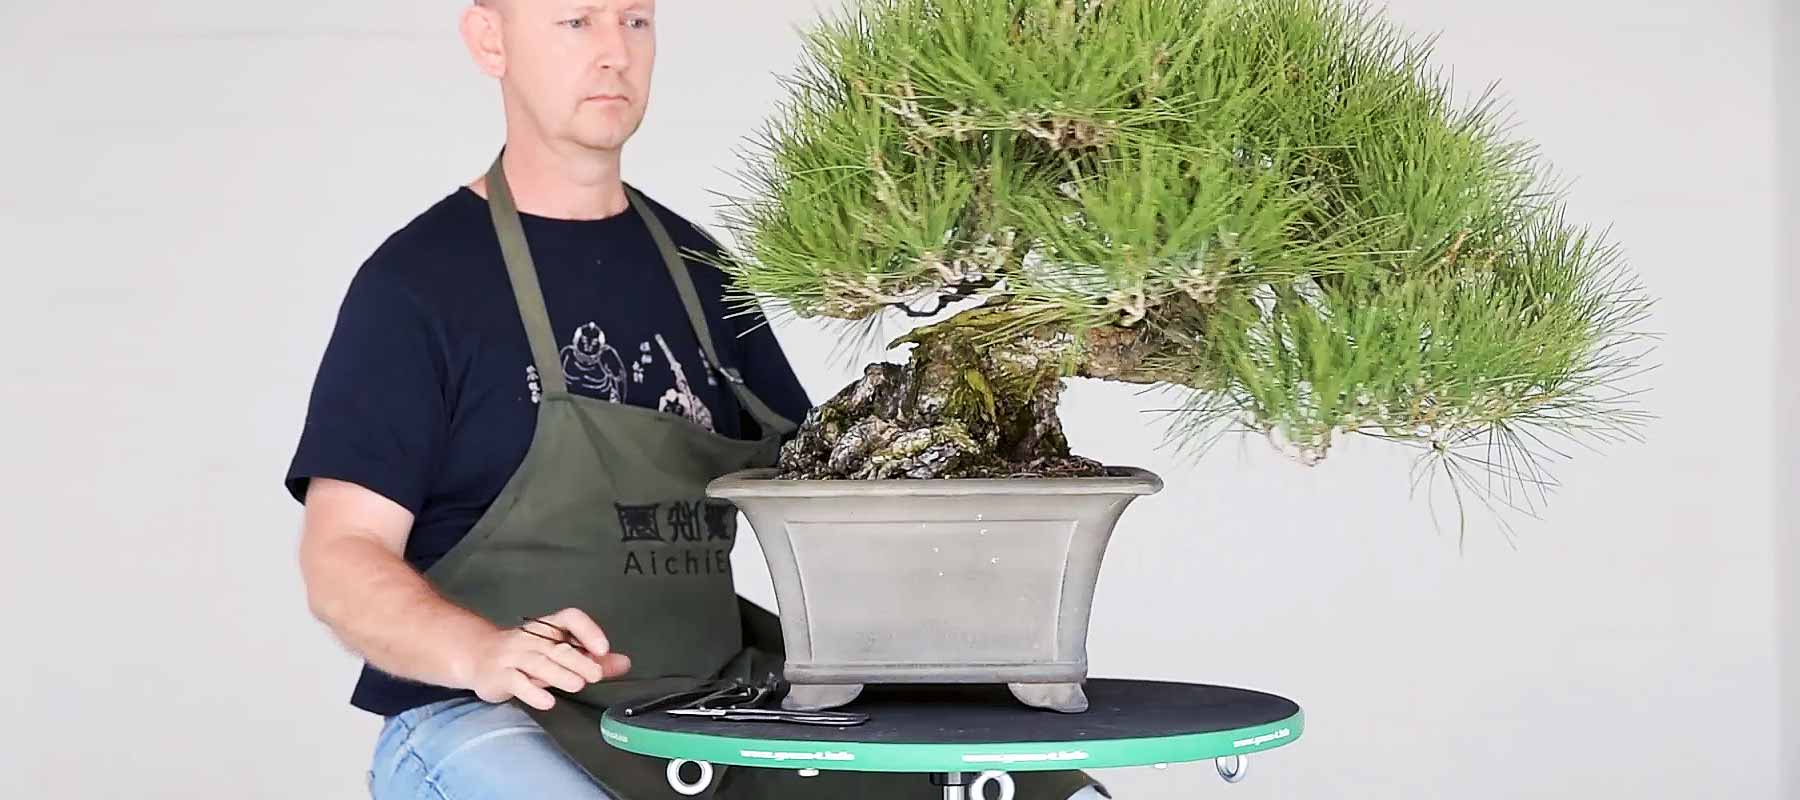 Japanese turntables collection bonsai